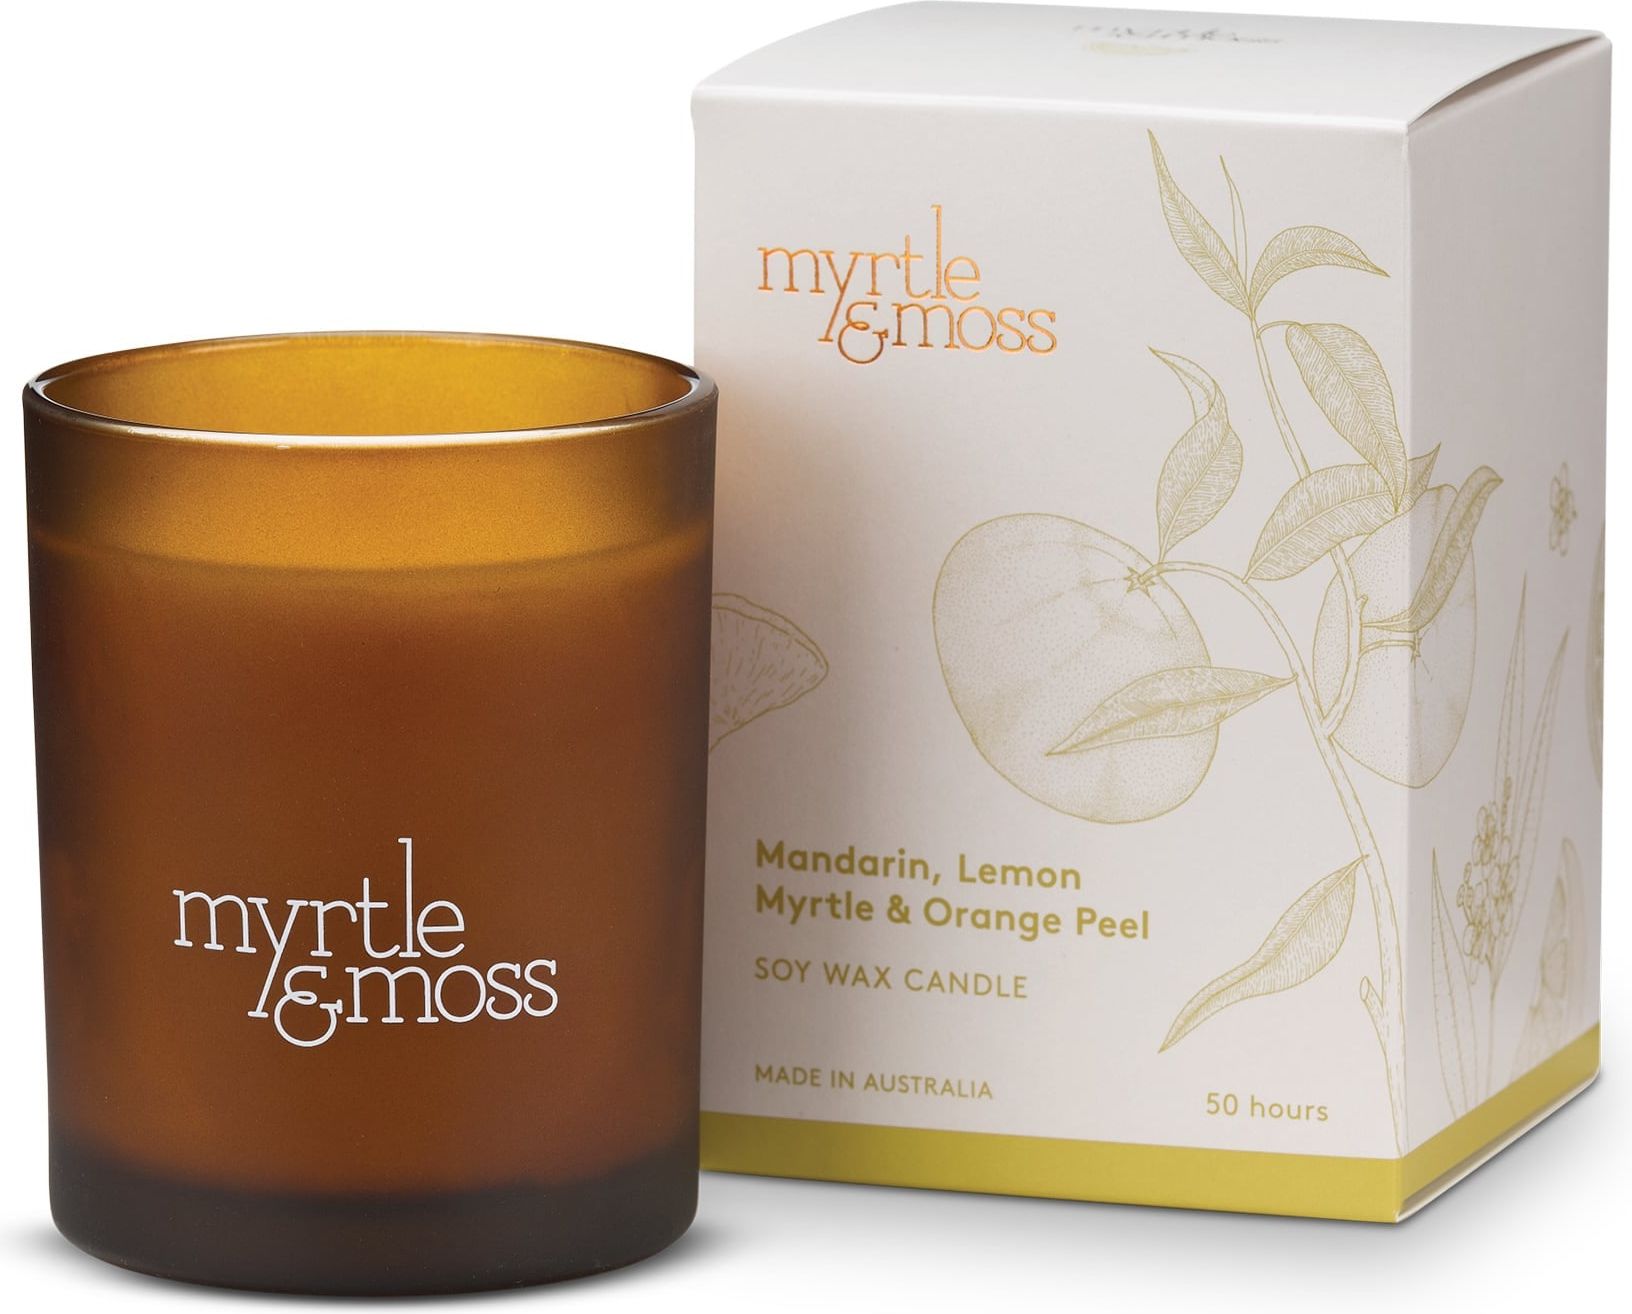 Myrtle & Moss Wax Candle